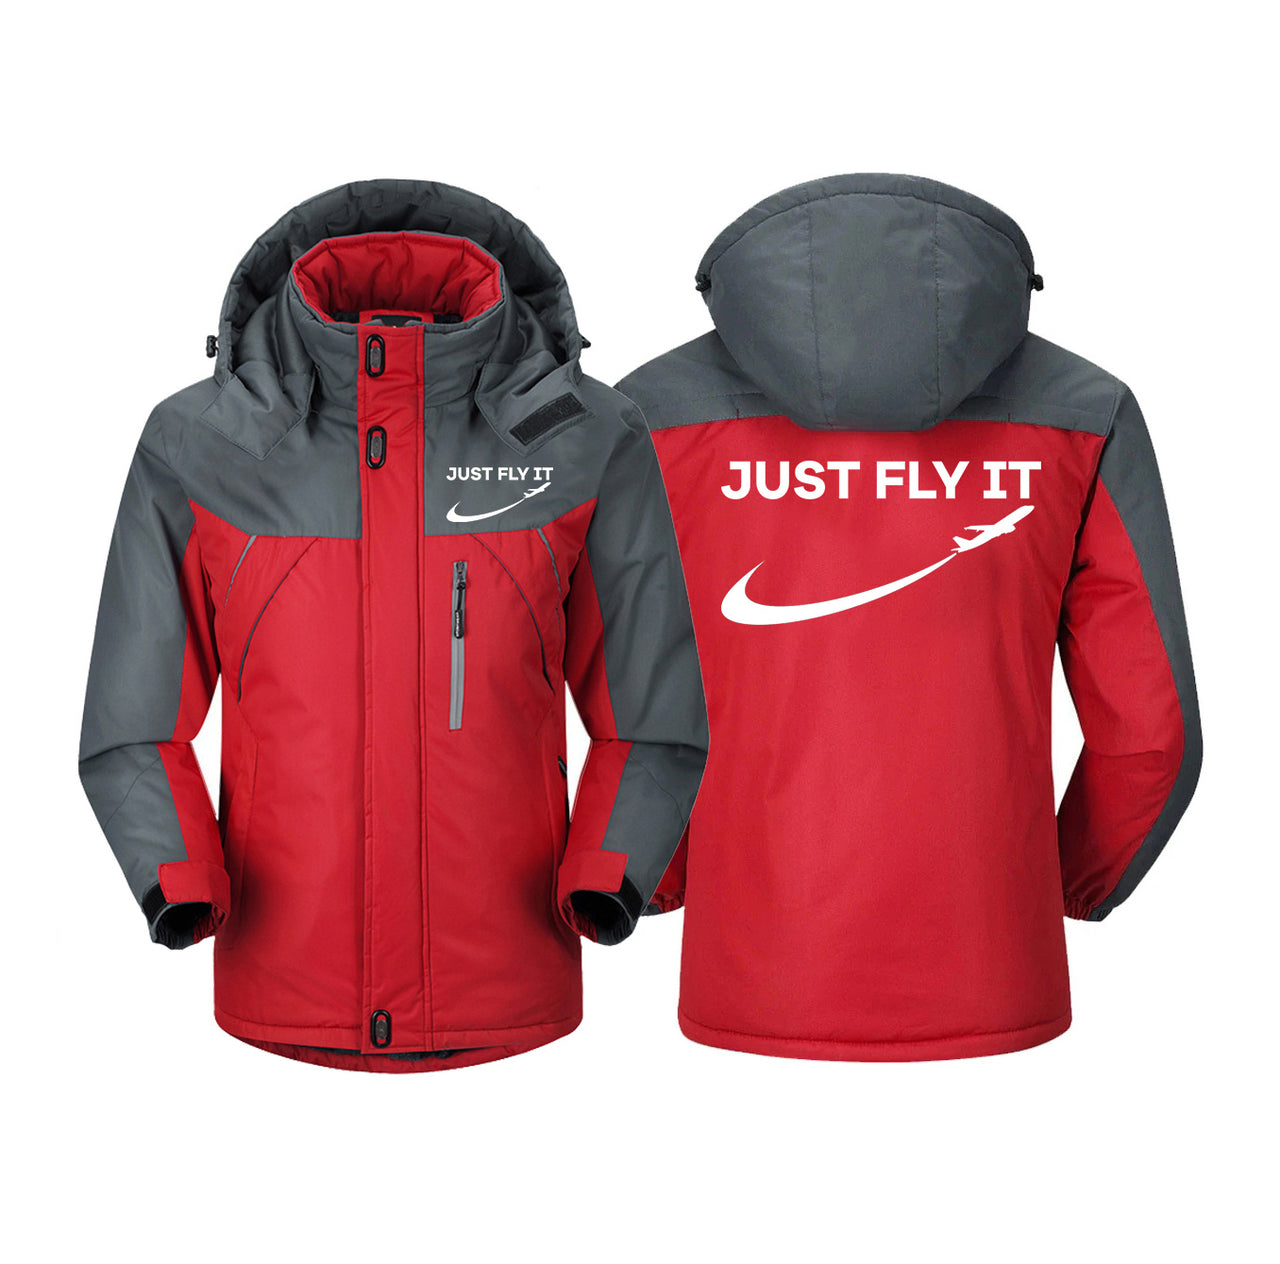 Just Fly It 2 Designed Thick Winter Jackets